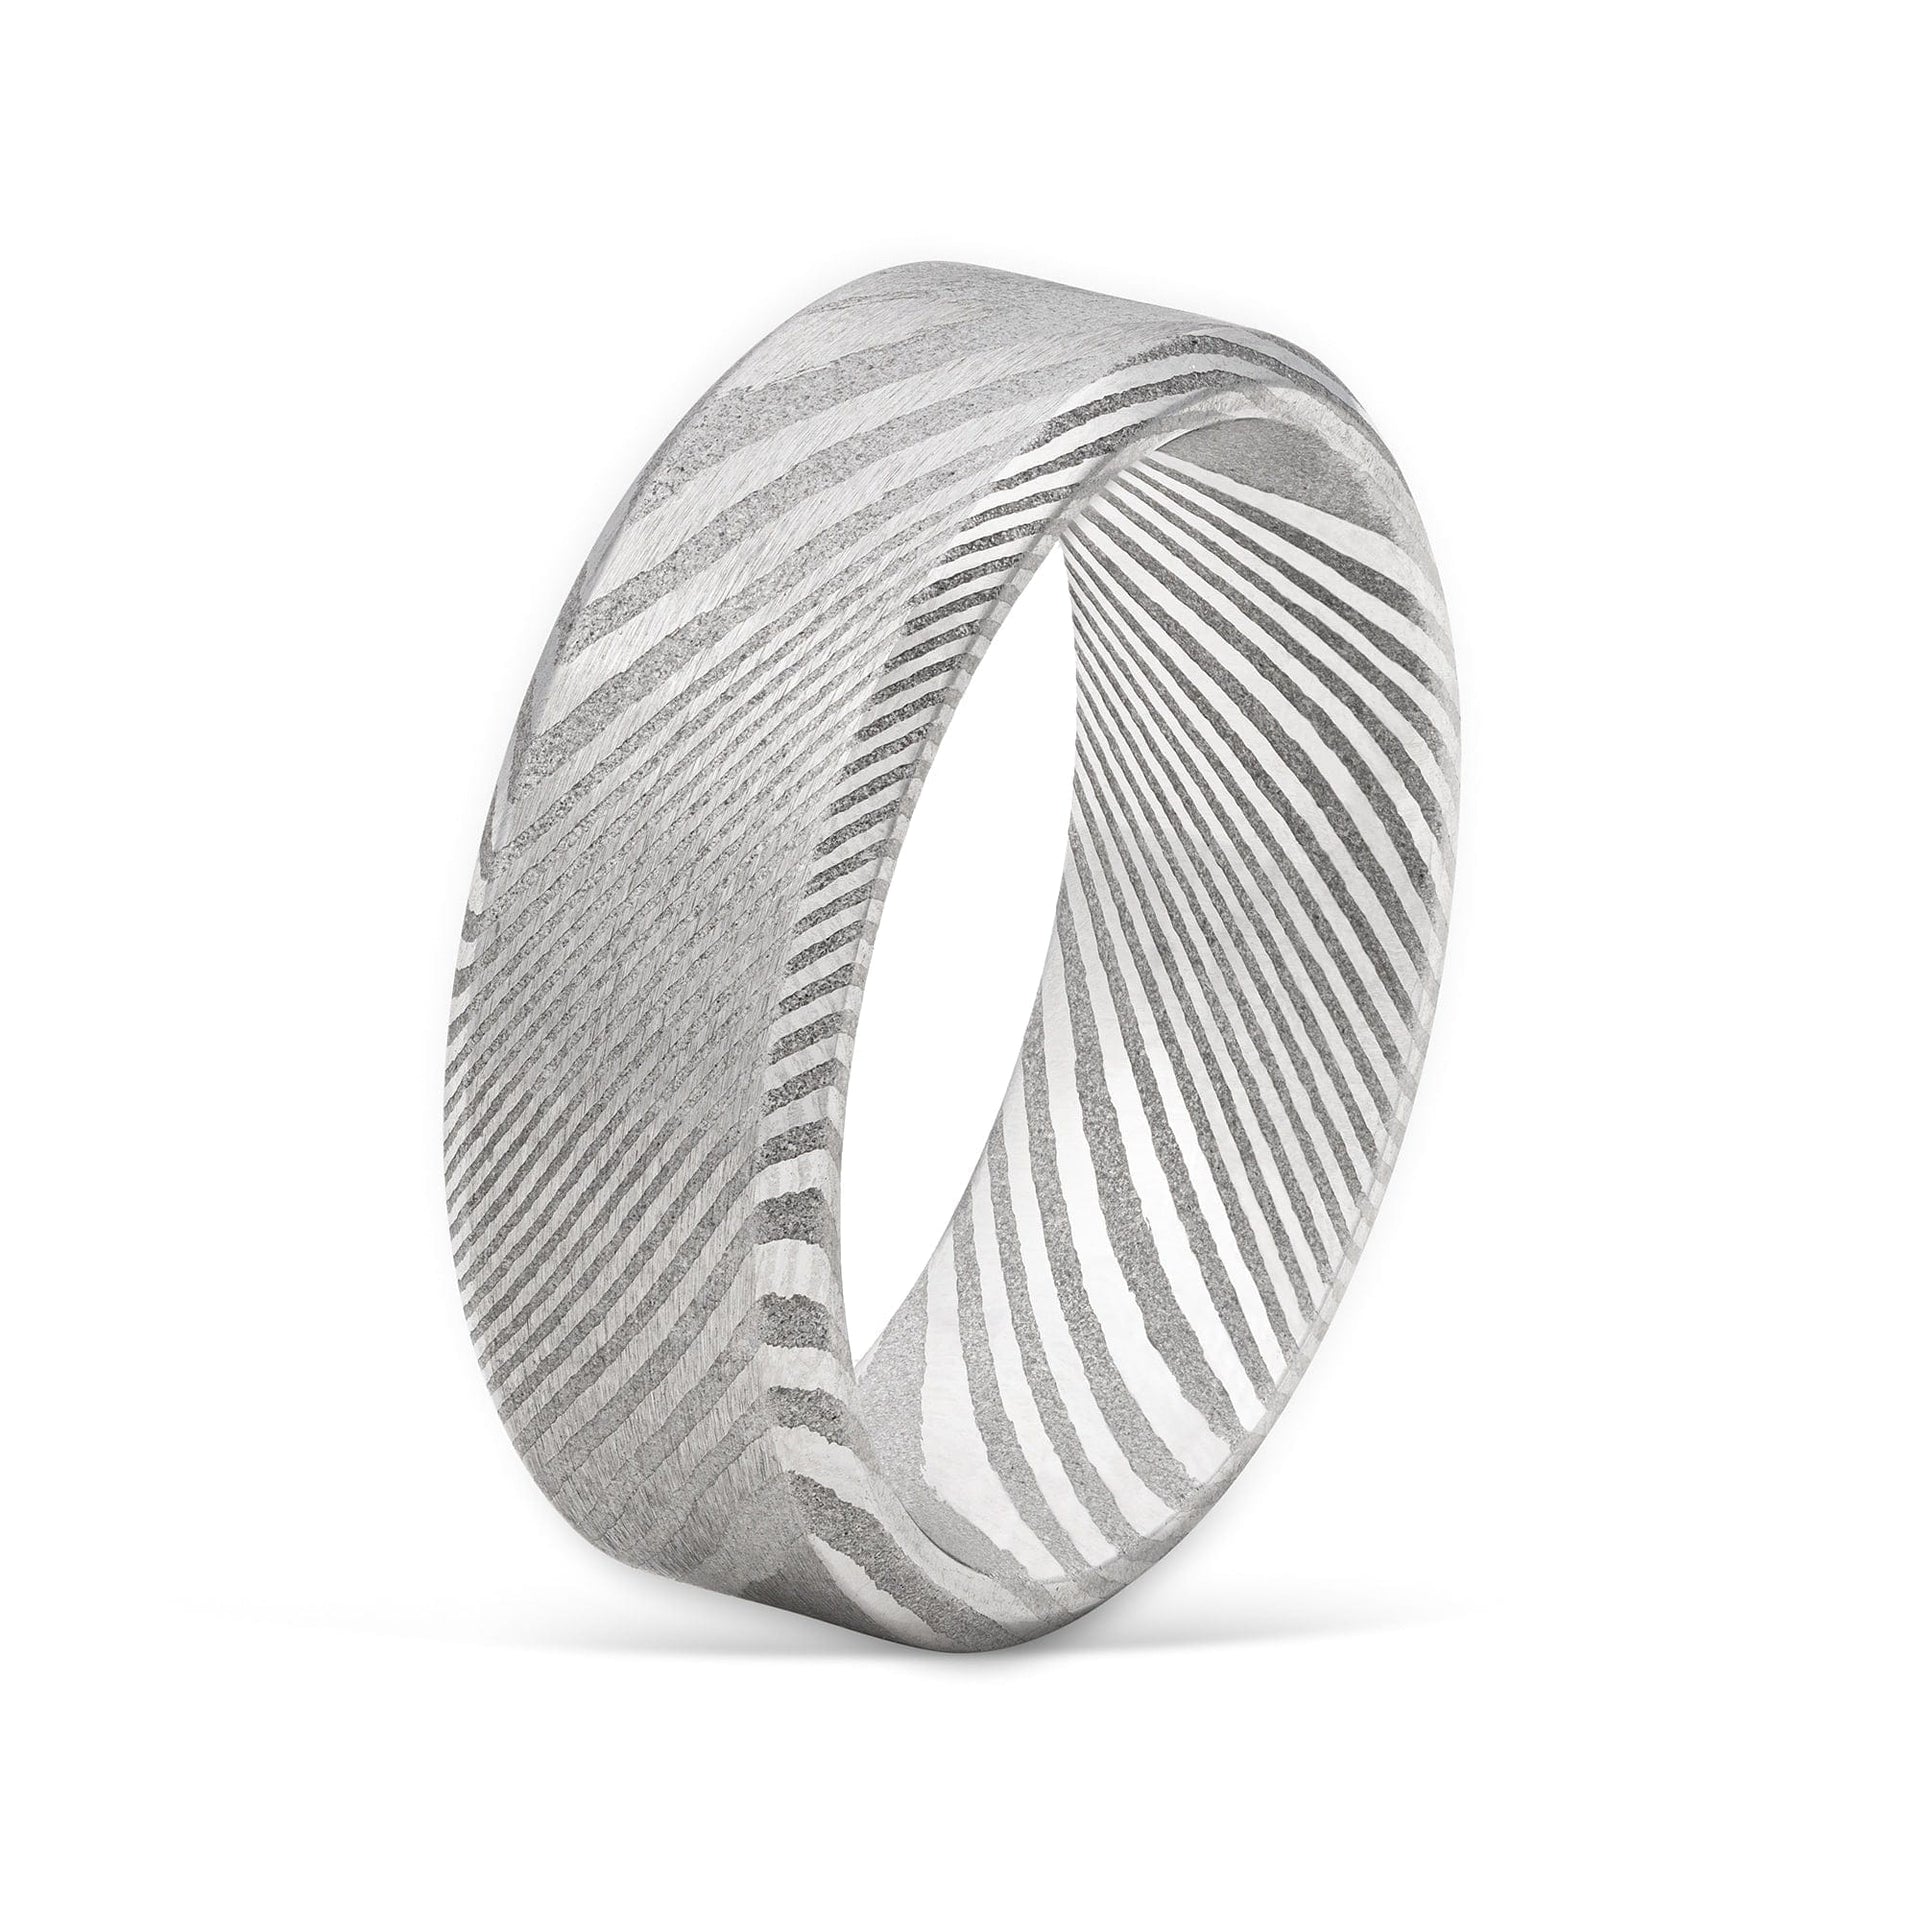 Silver Men's Wedding Band made of Damascus steel